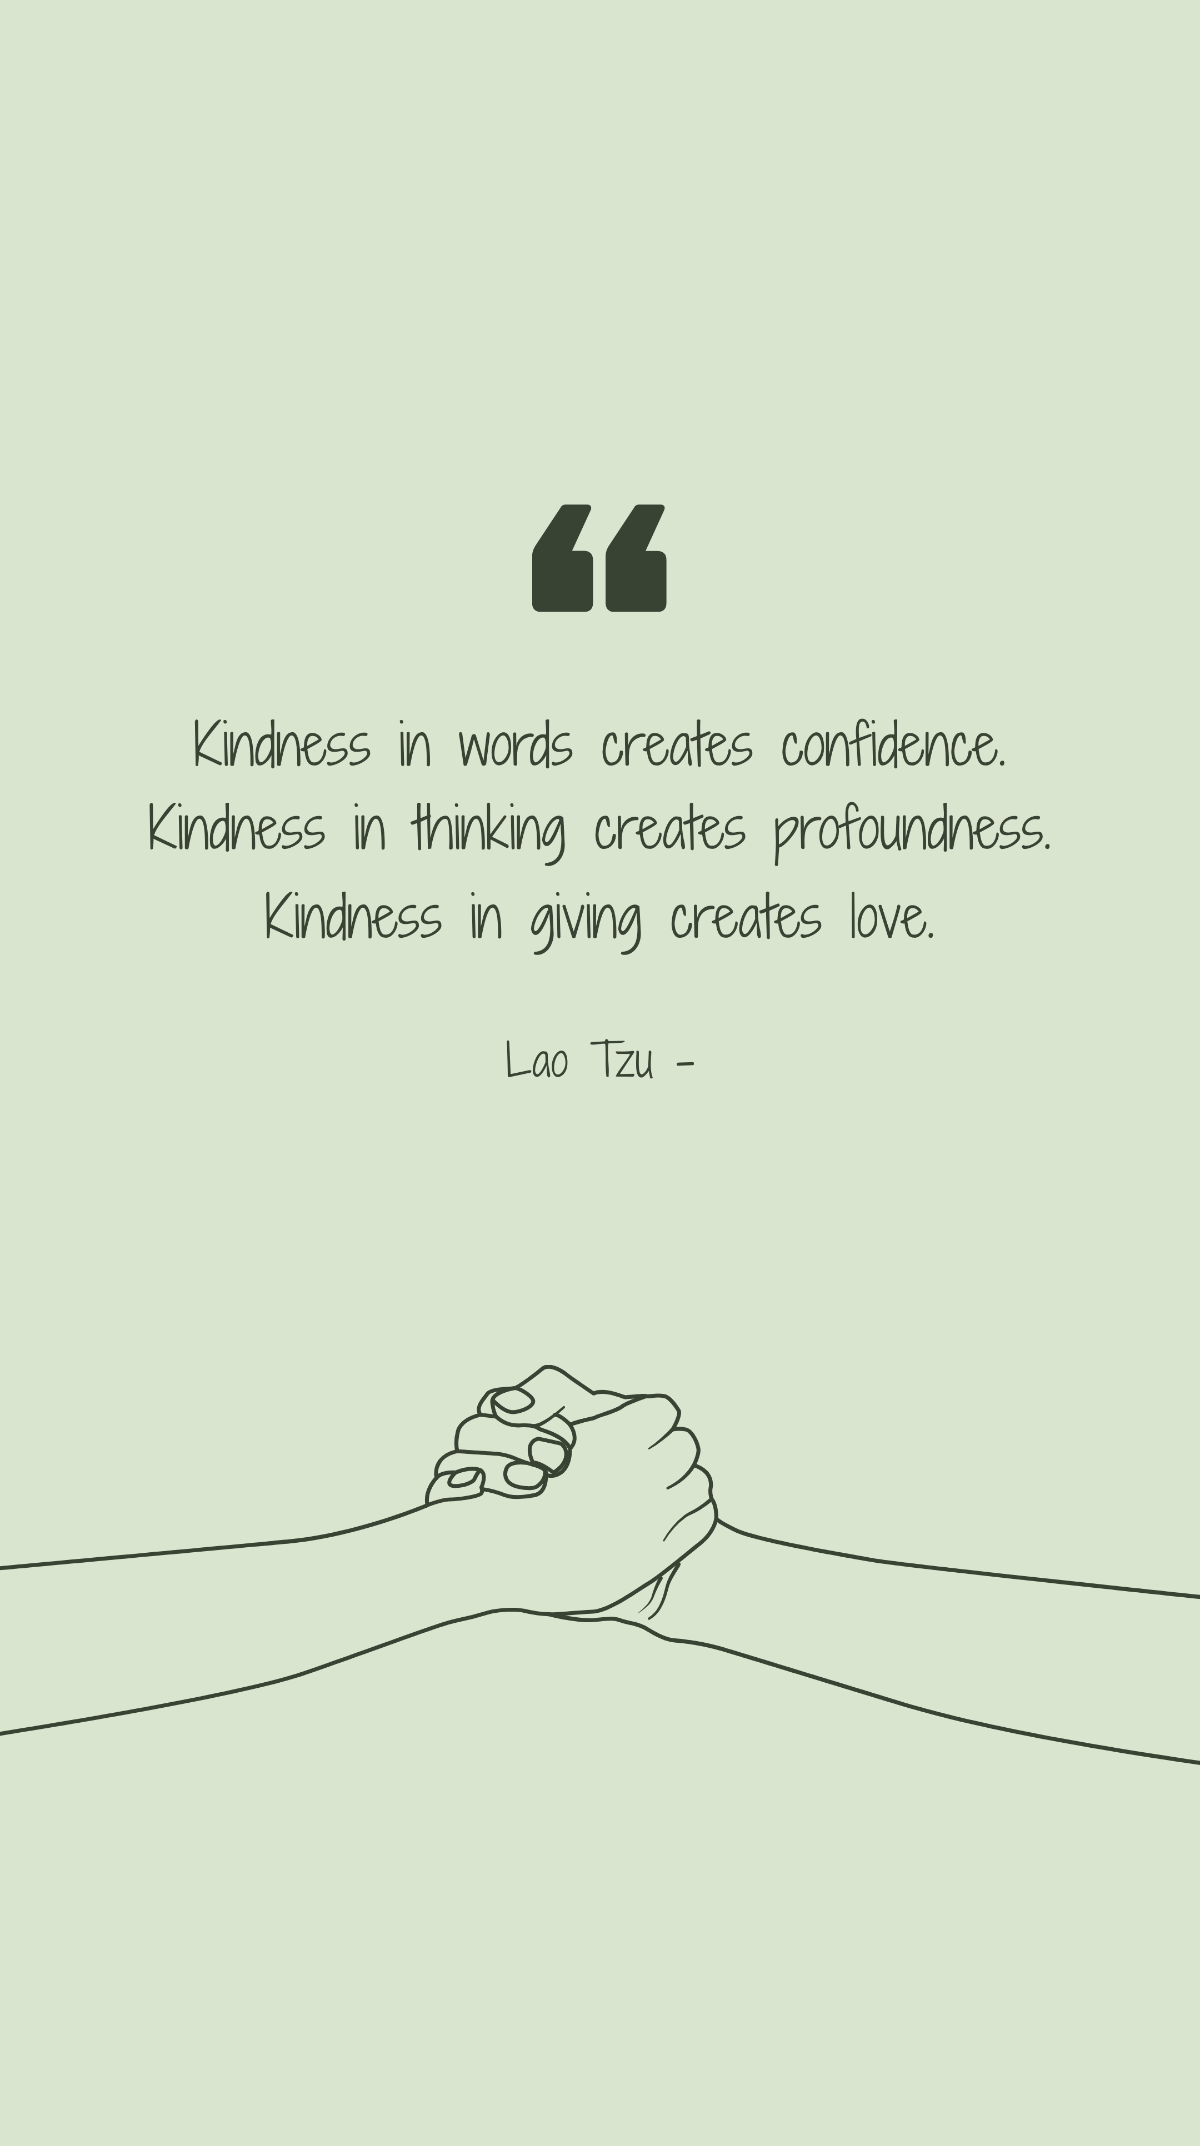 Lao Tzu - Kindness in words creates confidence. Kindness in thinking creates profoundness. Kindness in giving creates love. Template